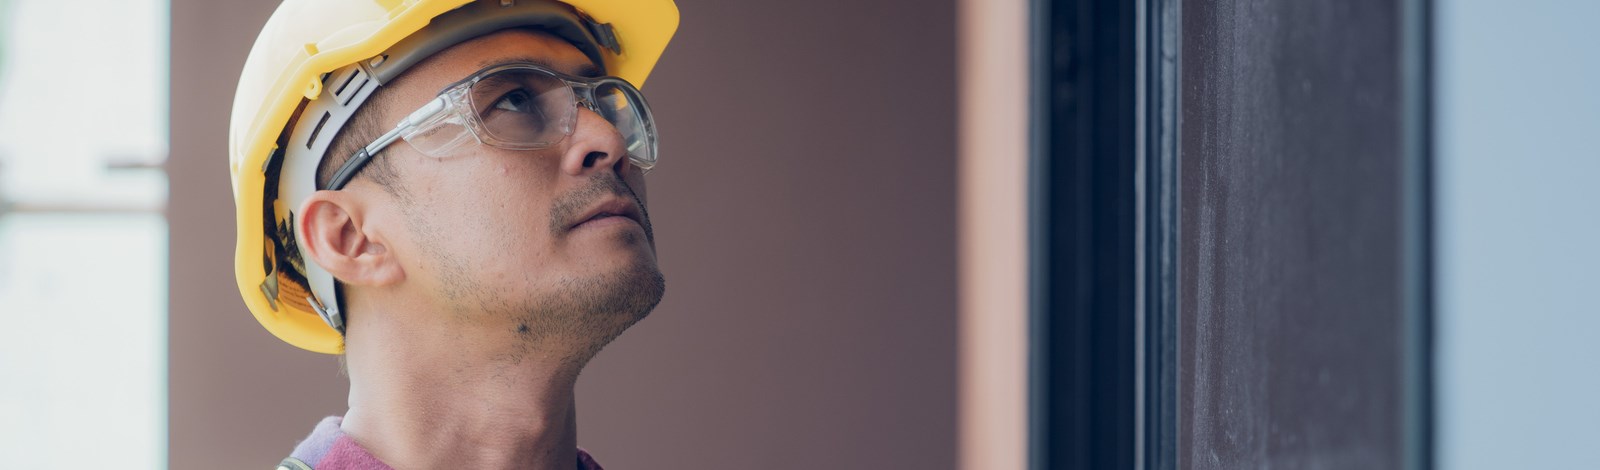 Construction Inspector with safety glasses and yellow hard hat